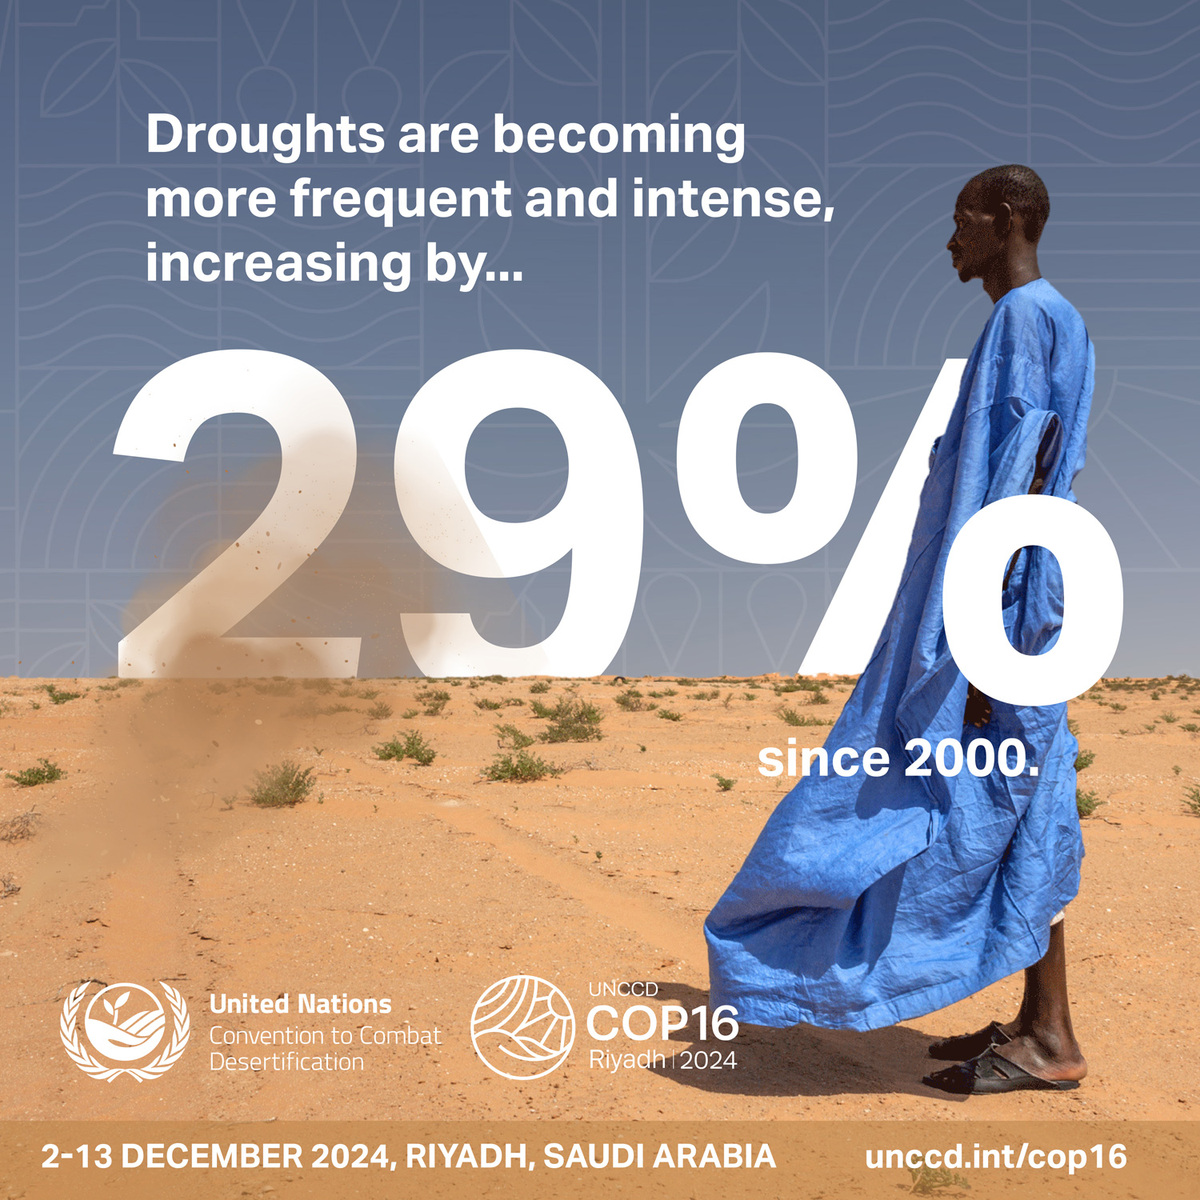 🚨 Droughts hit harder and last longer. 3/4 of the world may face water scarcity by 2050. At #UNCCDCOP16, the International #Drought Resilience Alliance will lead discourse on how we turn land degradation into restoration to bolster economies and communities against #drought.